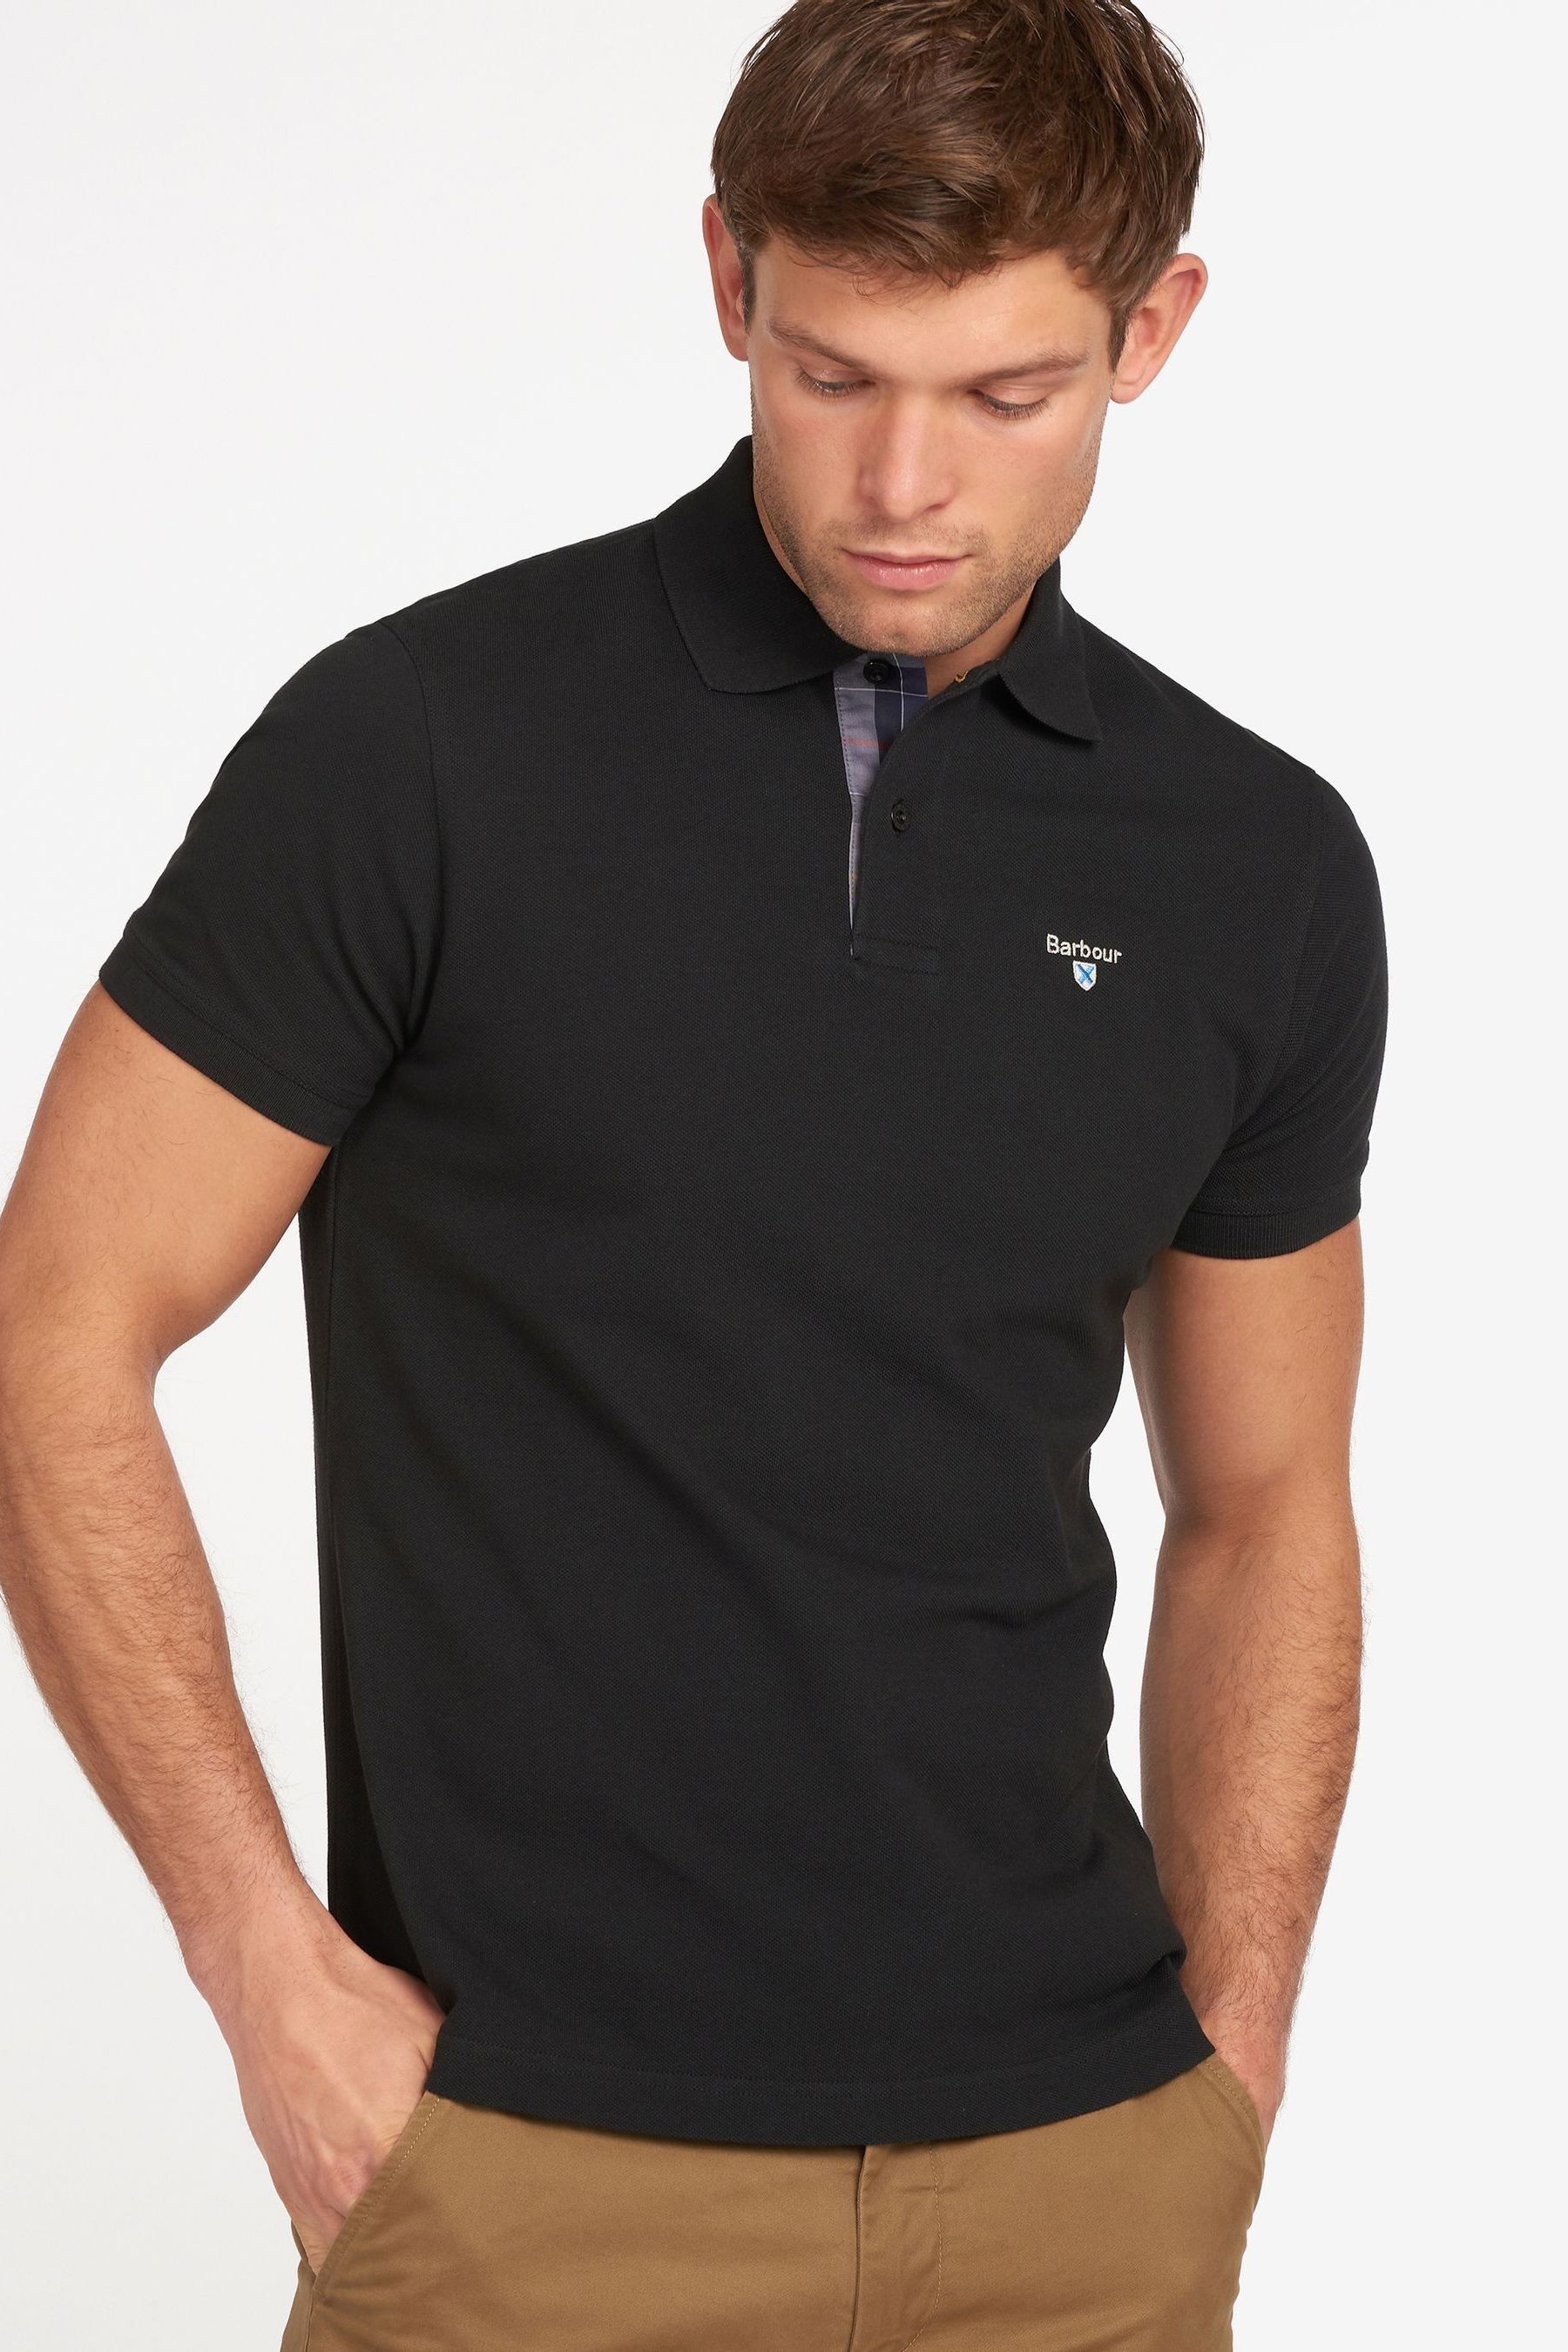 Buy Barbour® Black Classic Pique Polo Shirt from the Next UK online shop